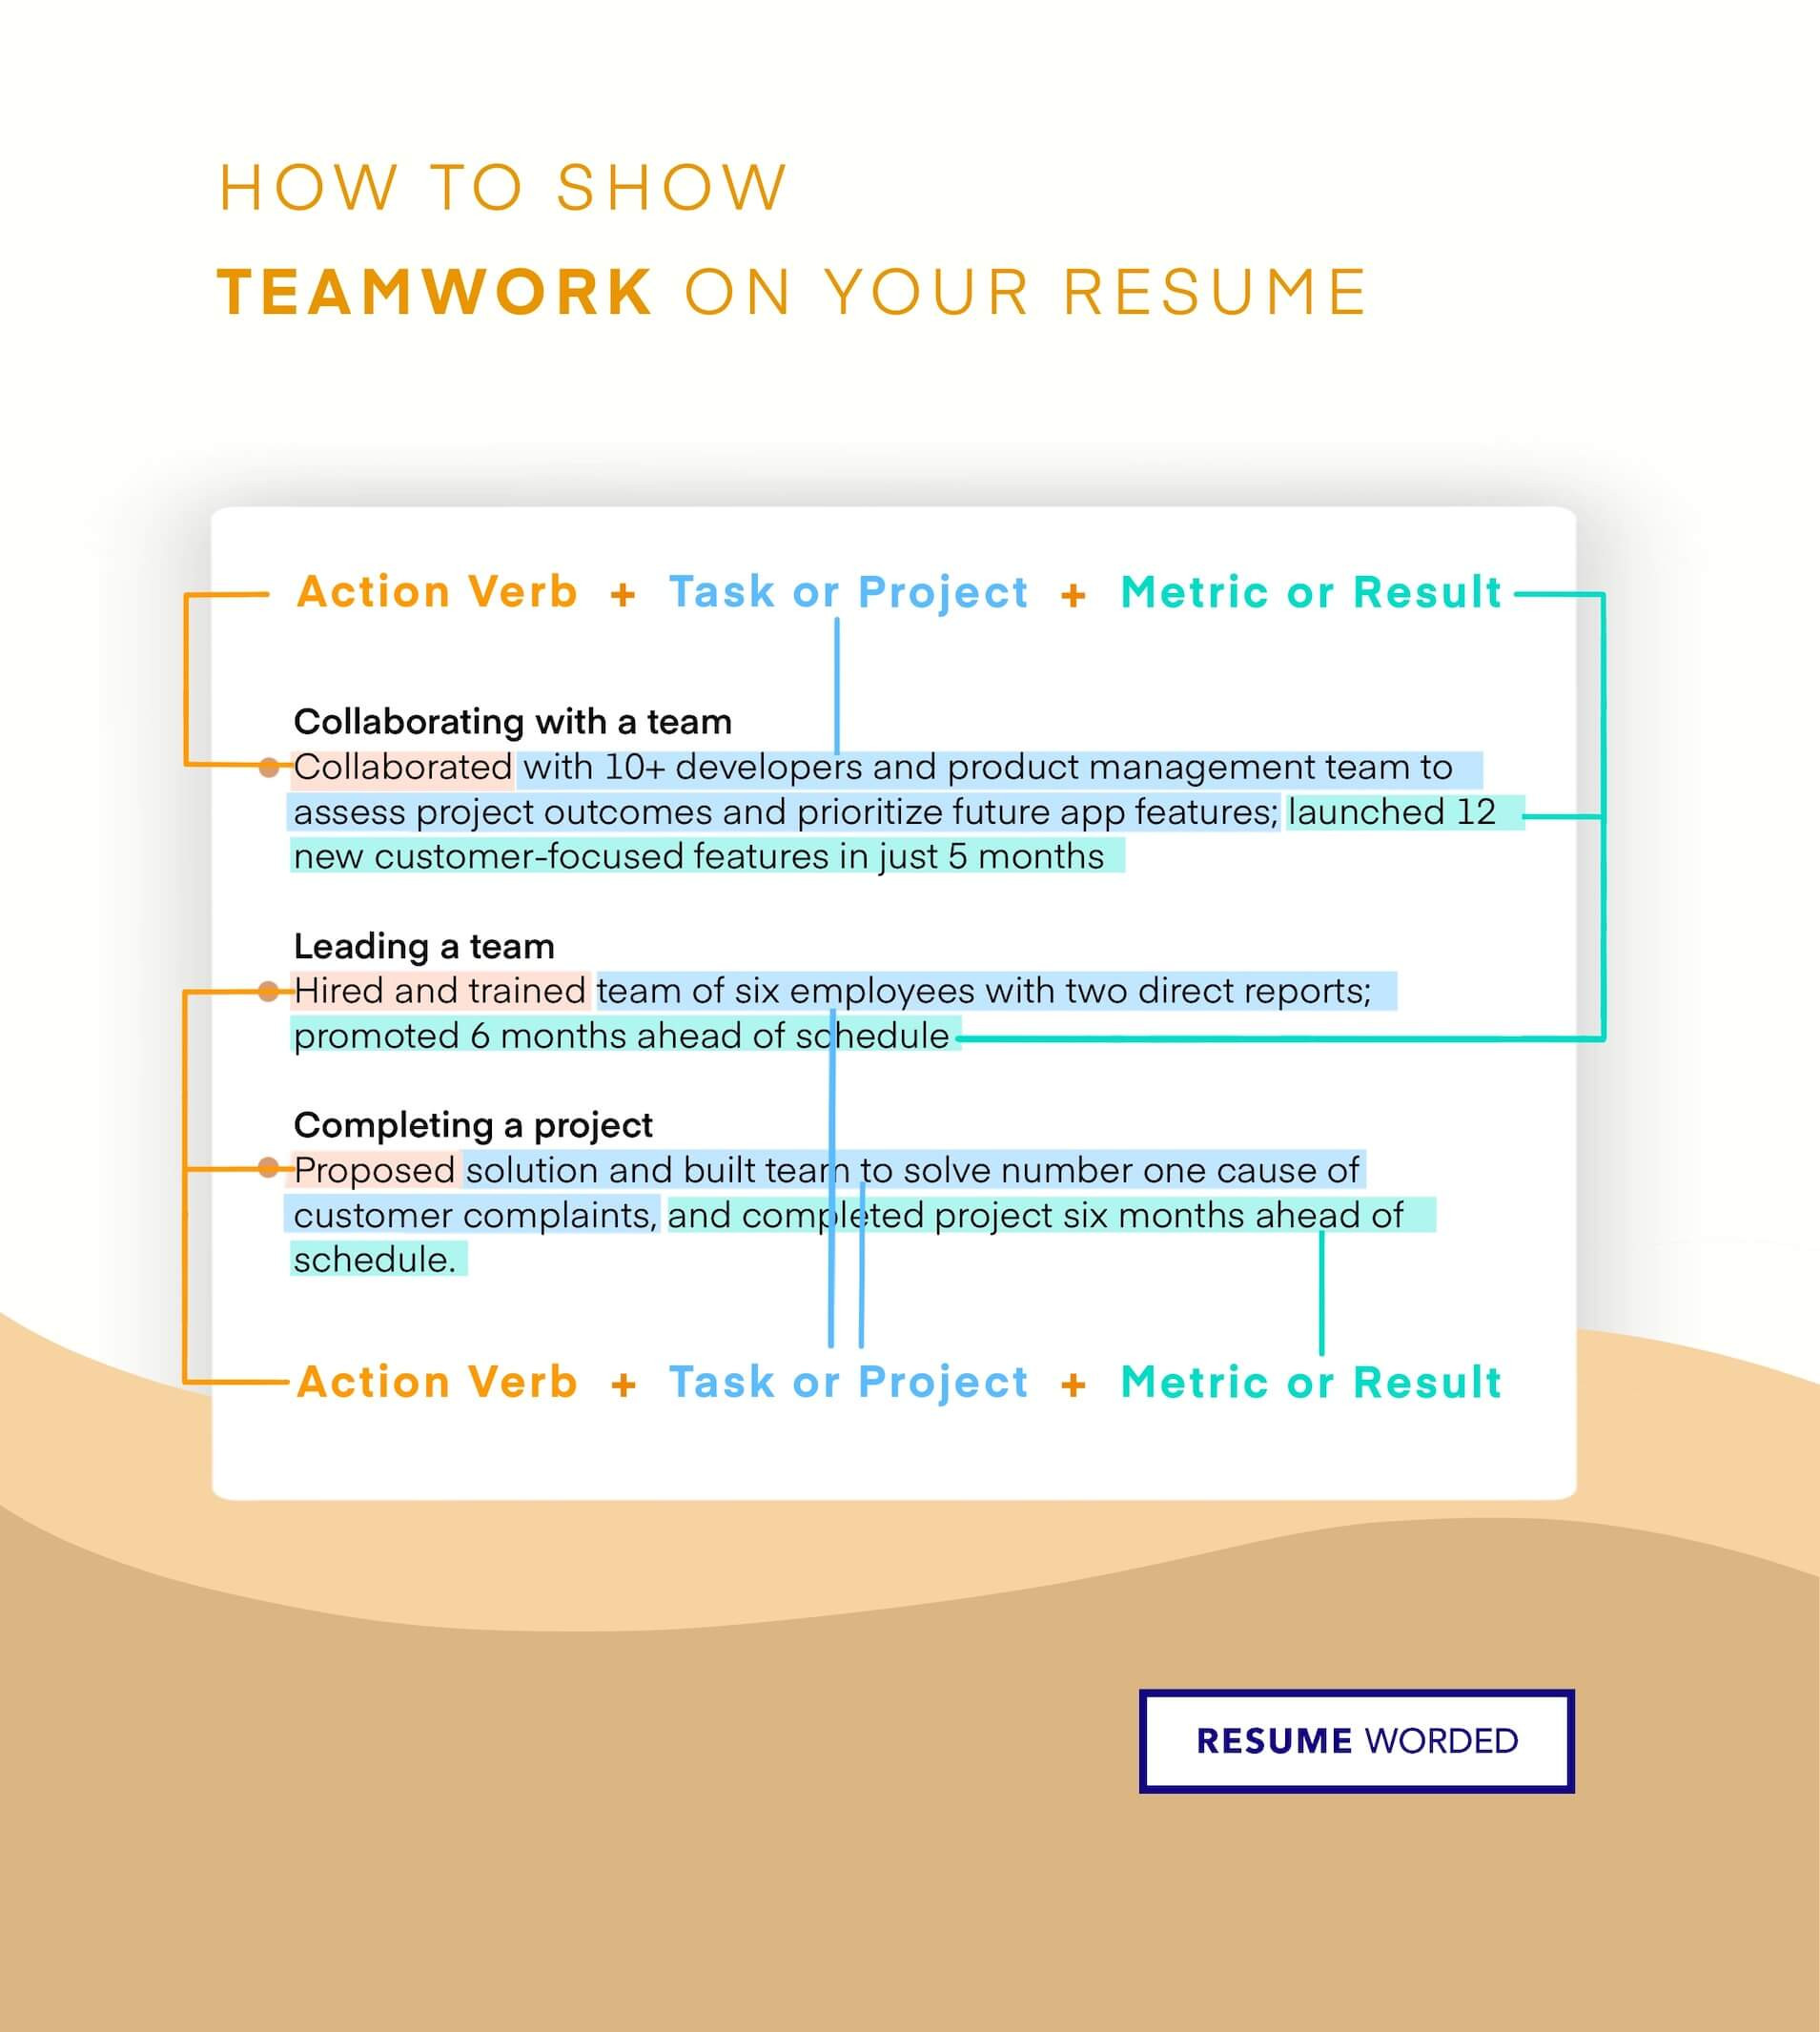 Sample Resume with Com Tia Credentials Resume Skills and Keywords for Automation Control Engineer …